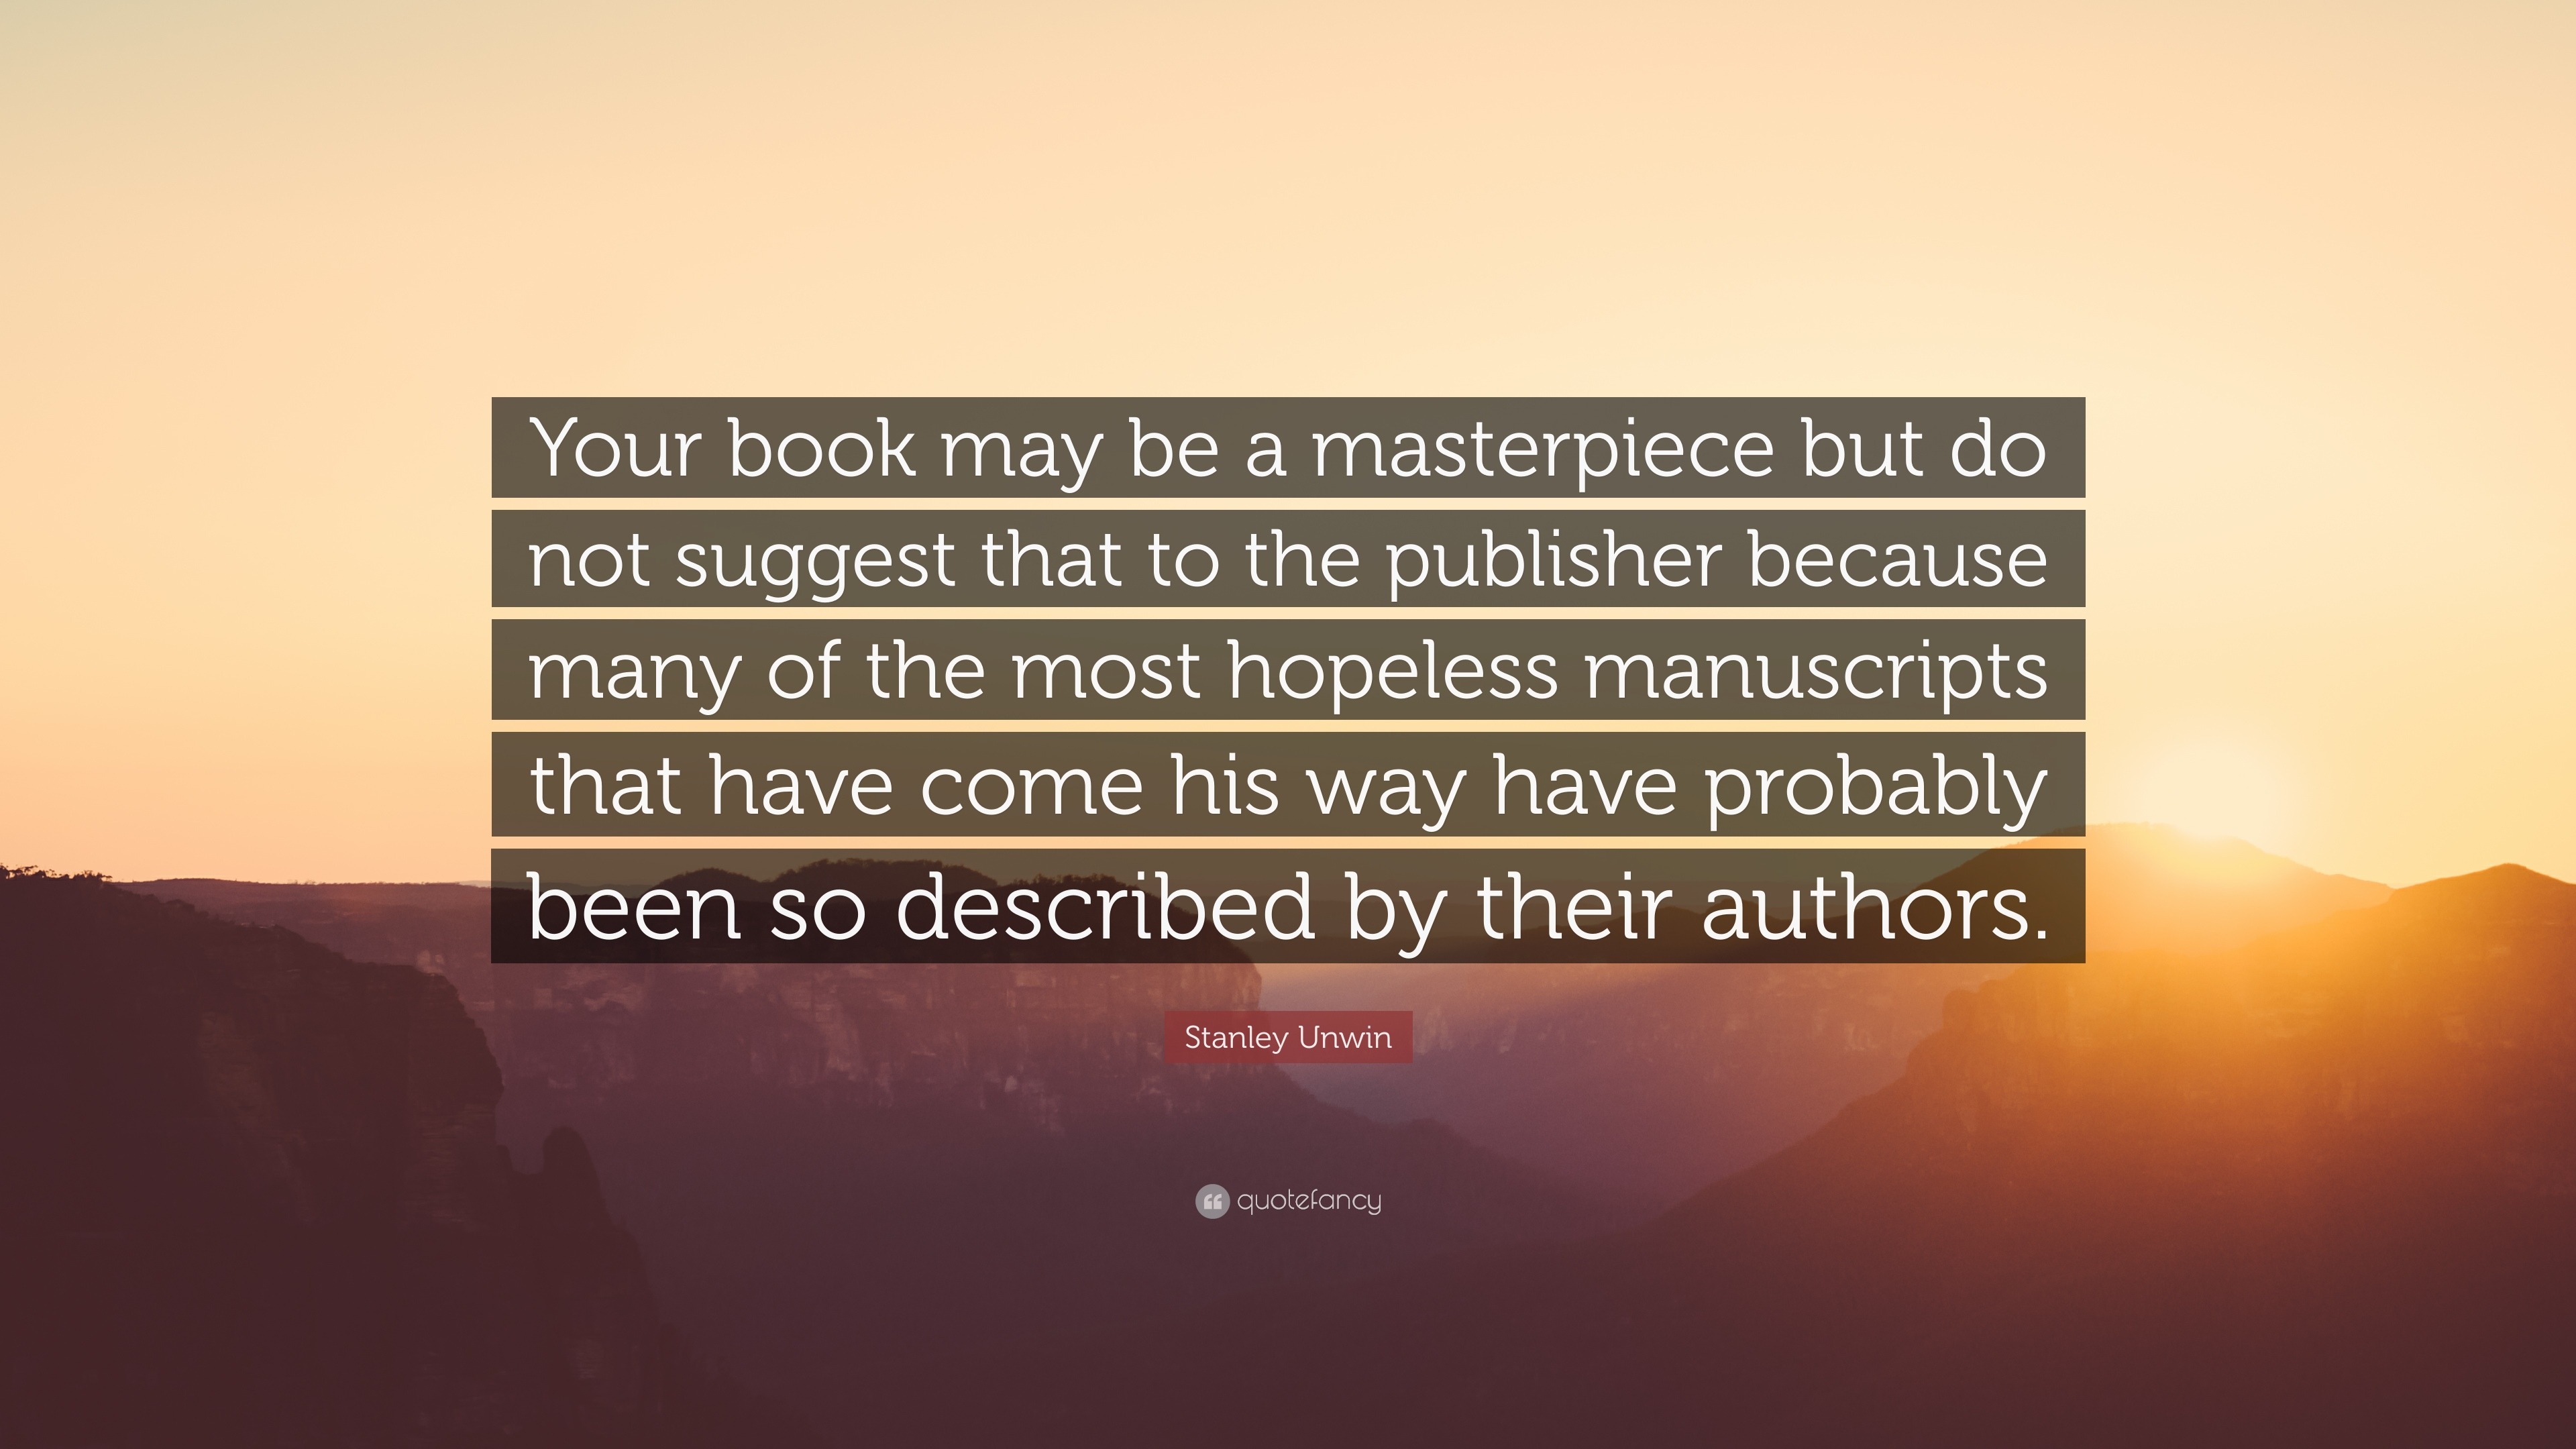 Stanley Unwin Quote: “Your book may be a masterpiece but do not suggest ...